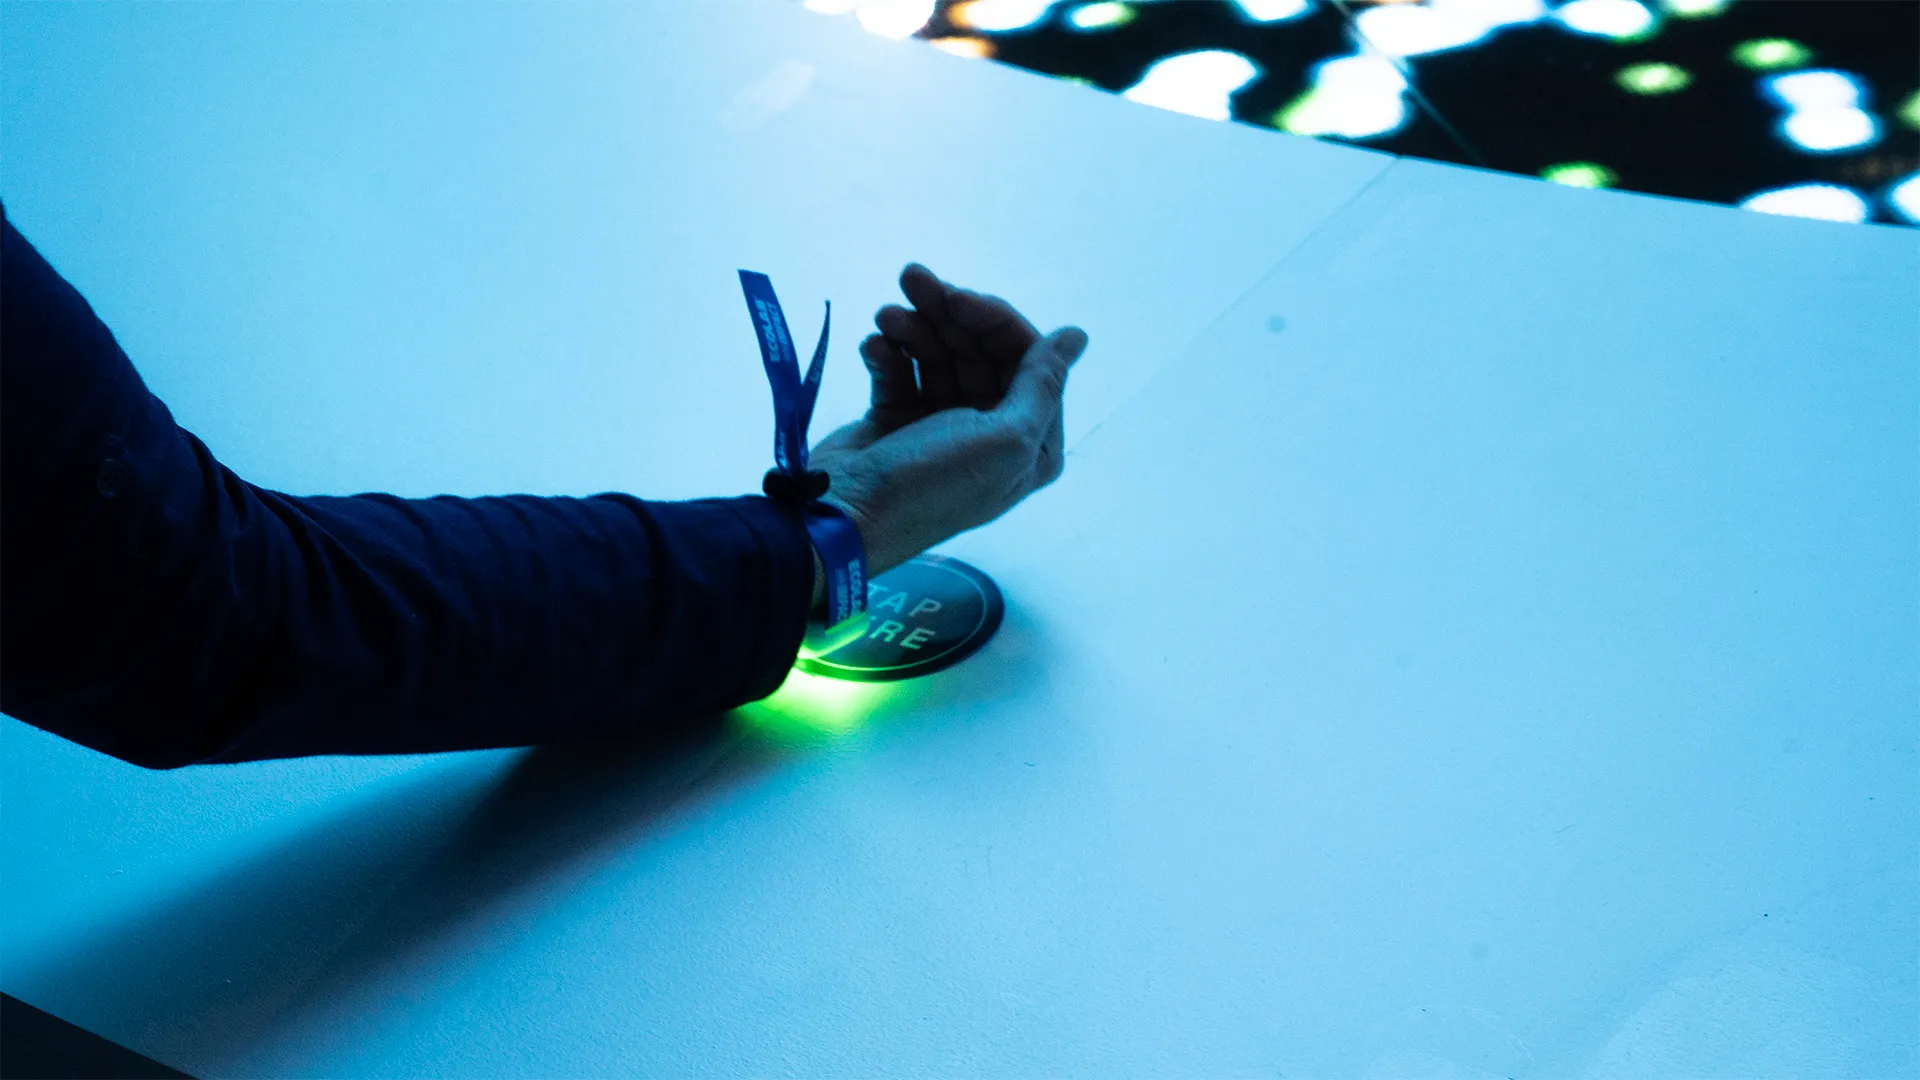 A close-up look of how a person is tapping the bracelet with a green LED light inside onto a RFID reader